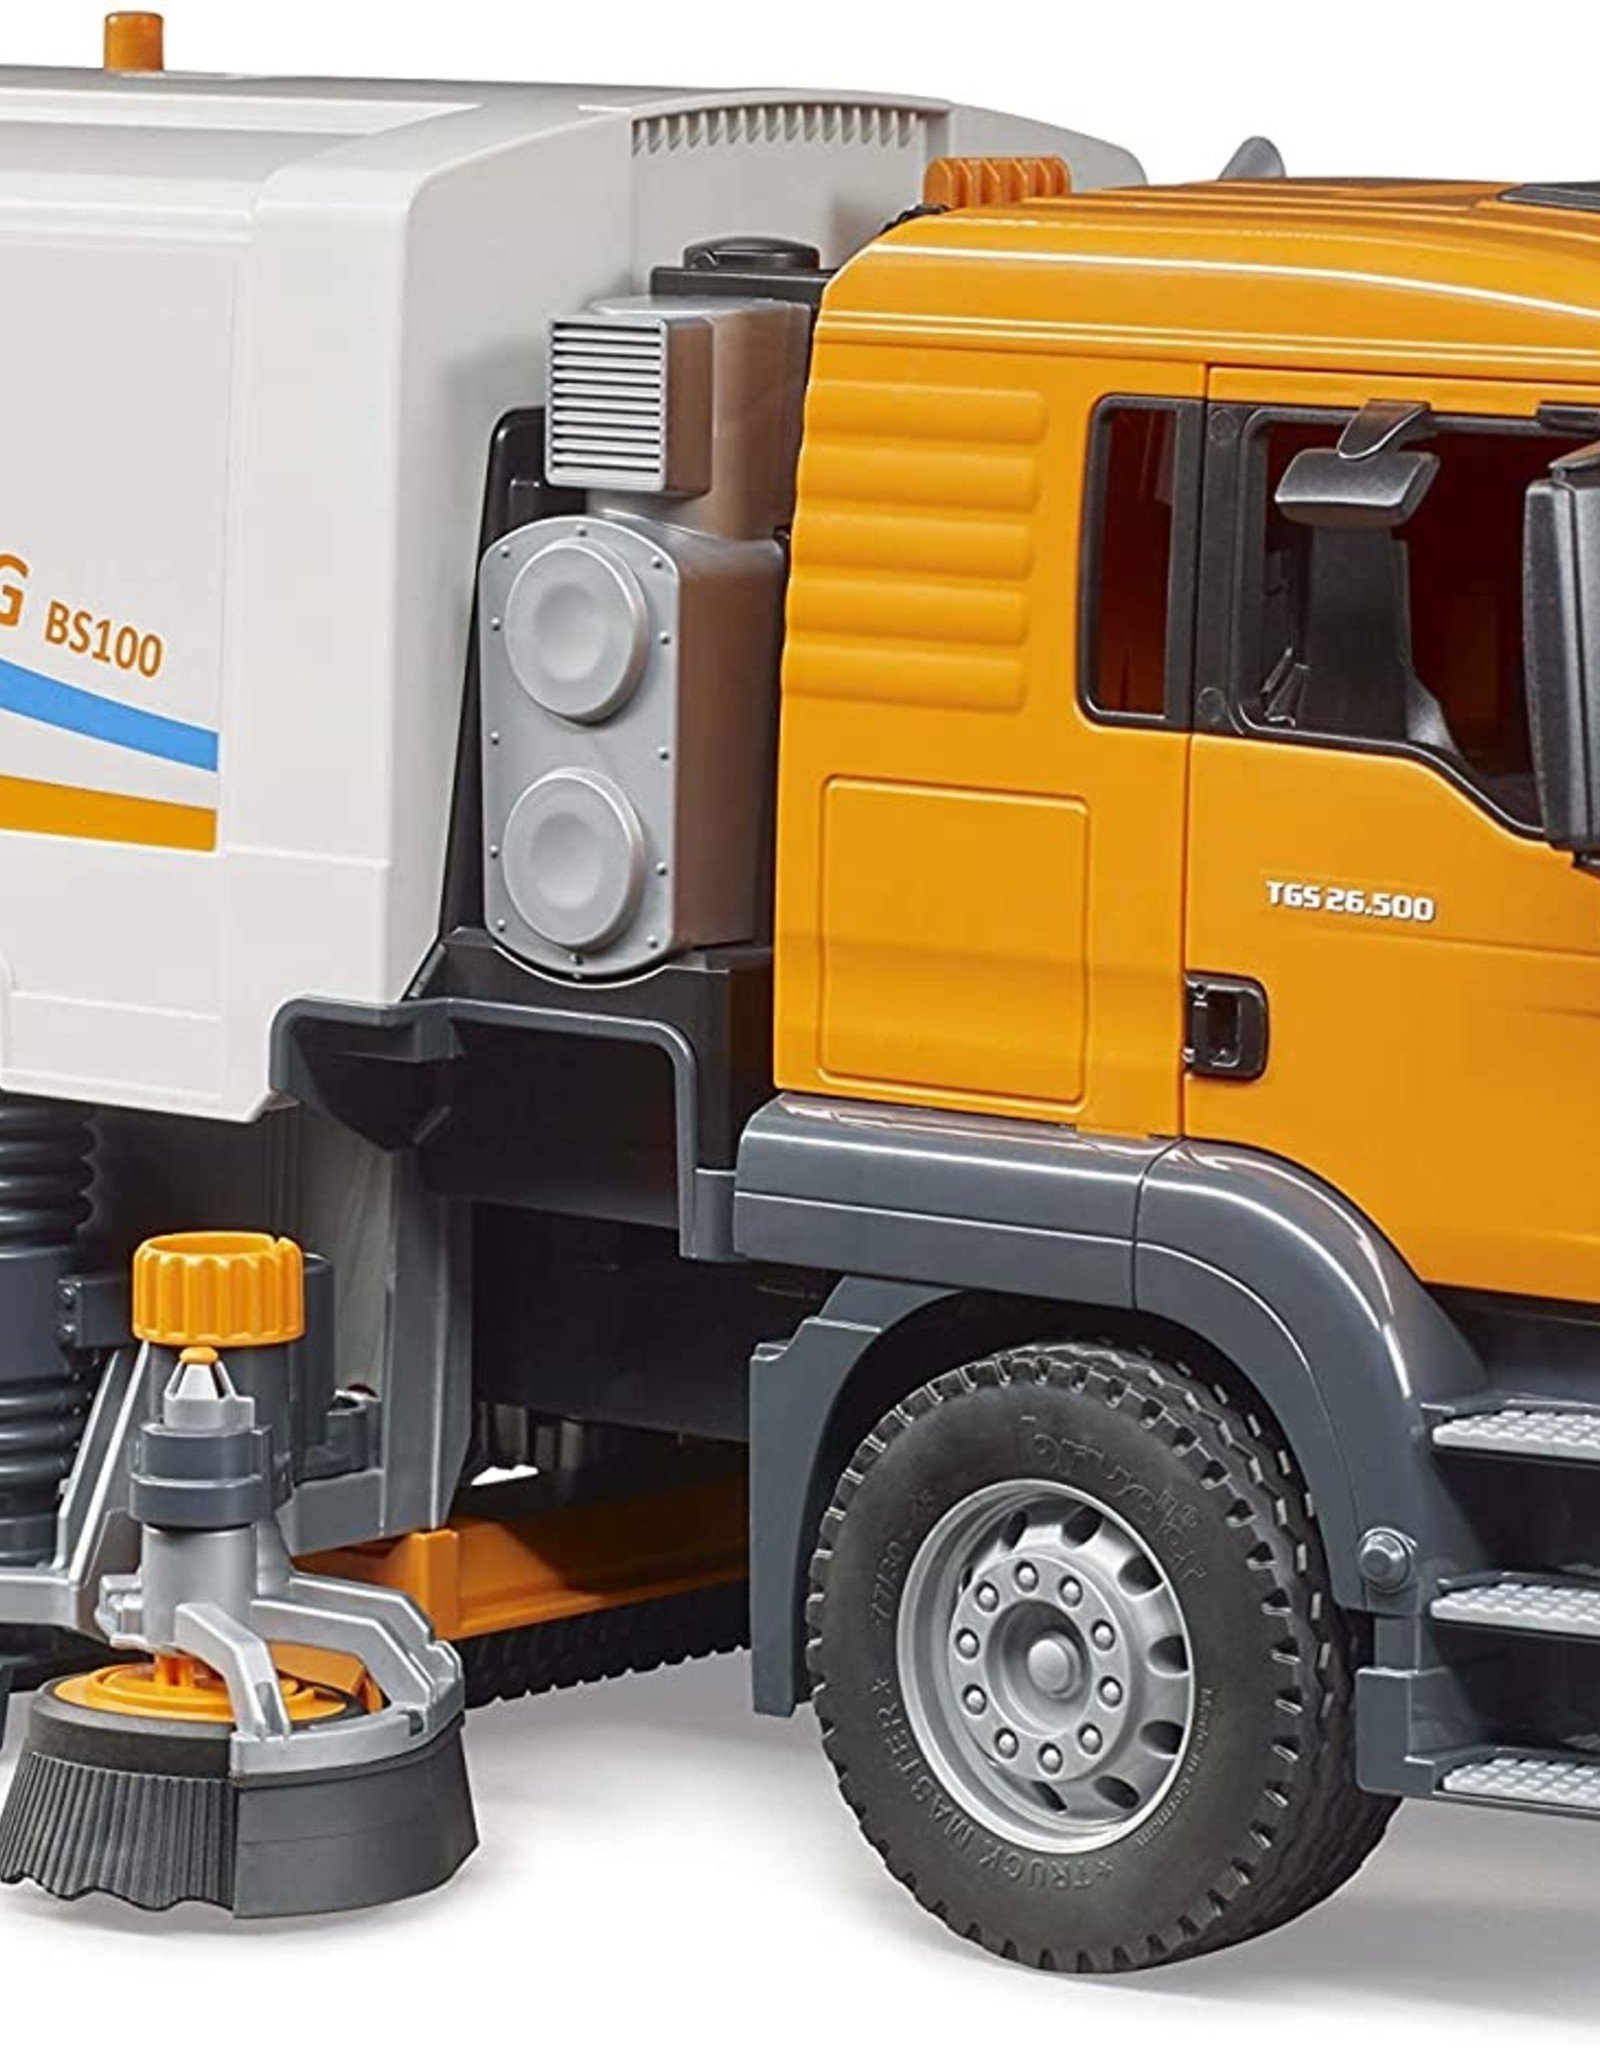  Bruder Toys - Commercial Realistic MAN TGS Street Sweeper Truck  with Open-able Doors, Adjustable Brushes, and Flexible Hose - Ages 4+ :  Toys & Games